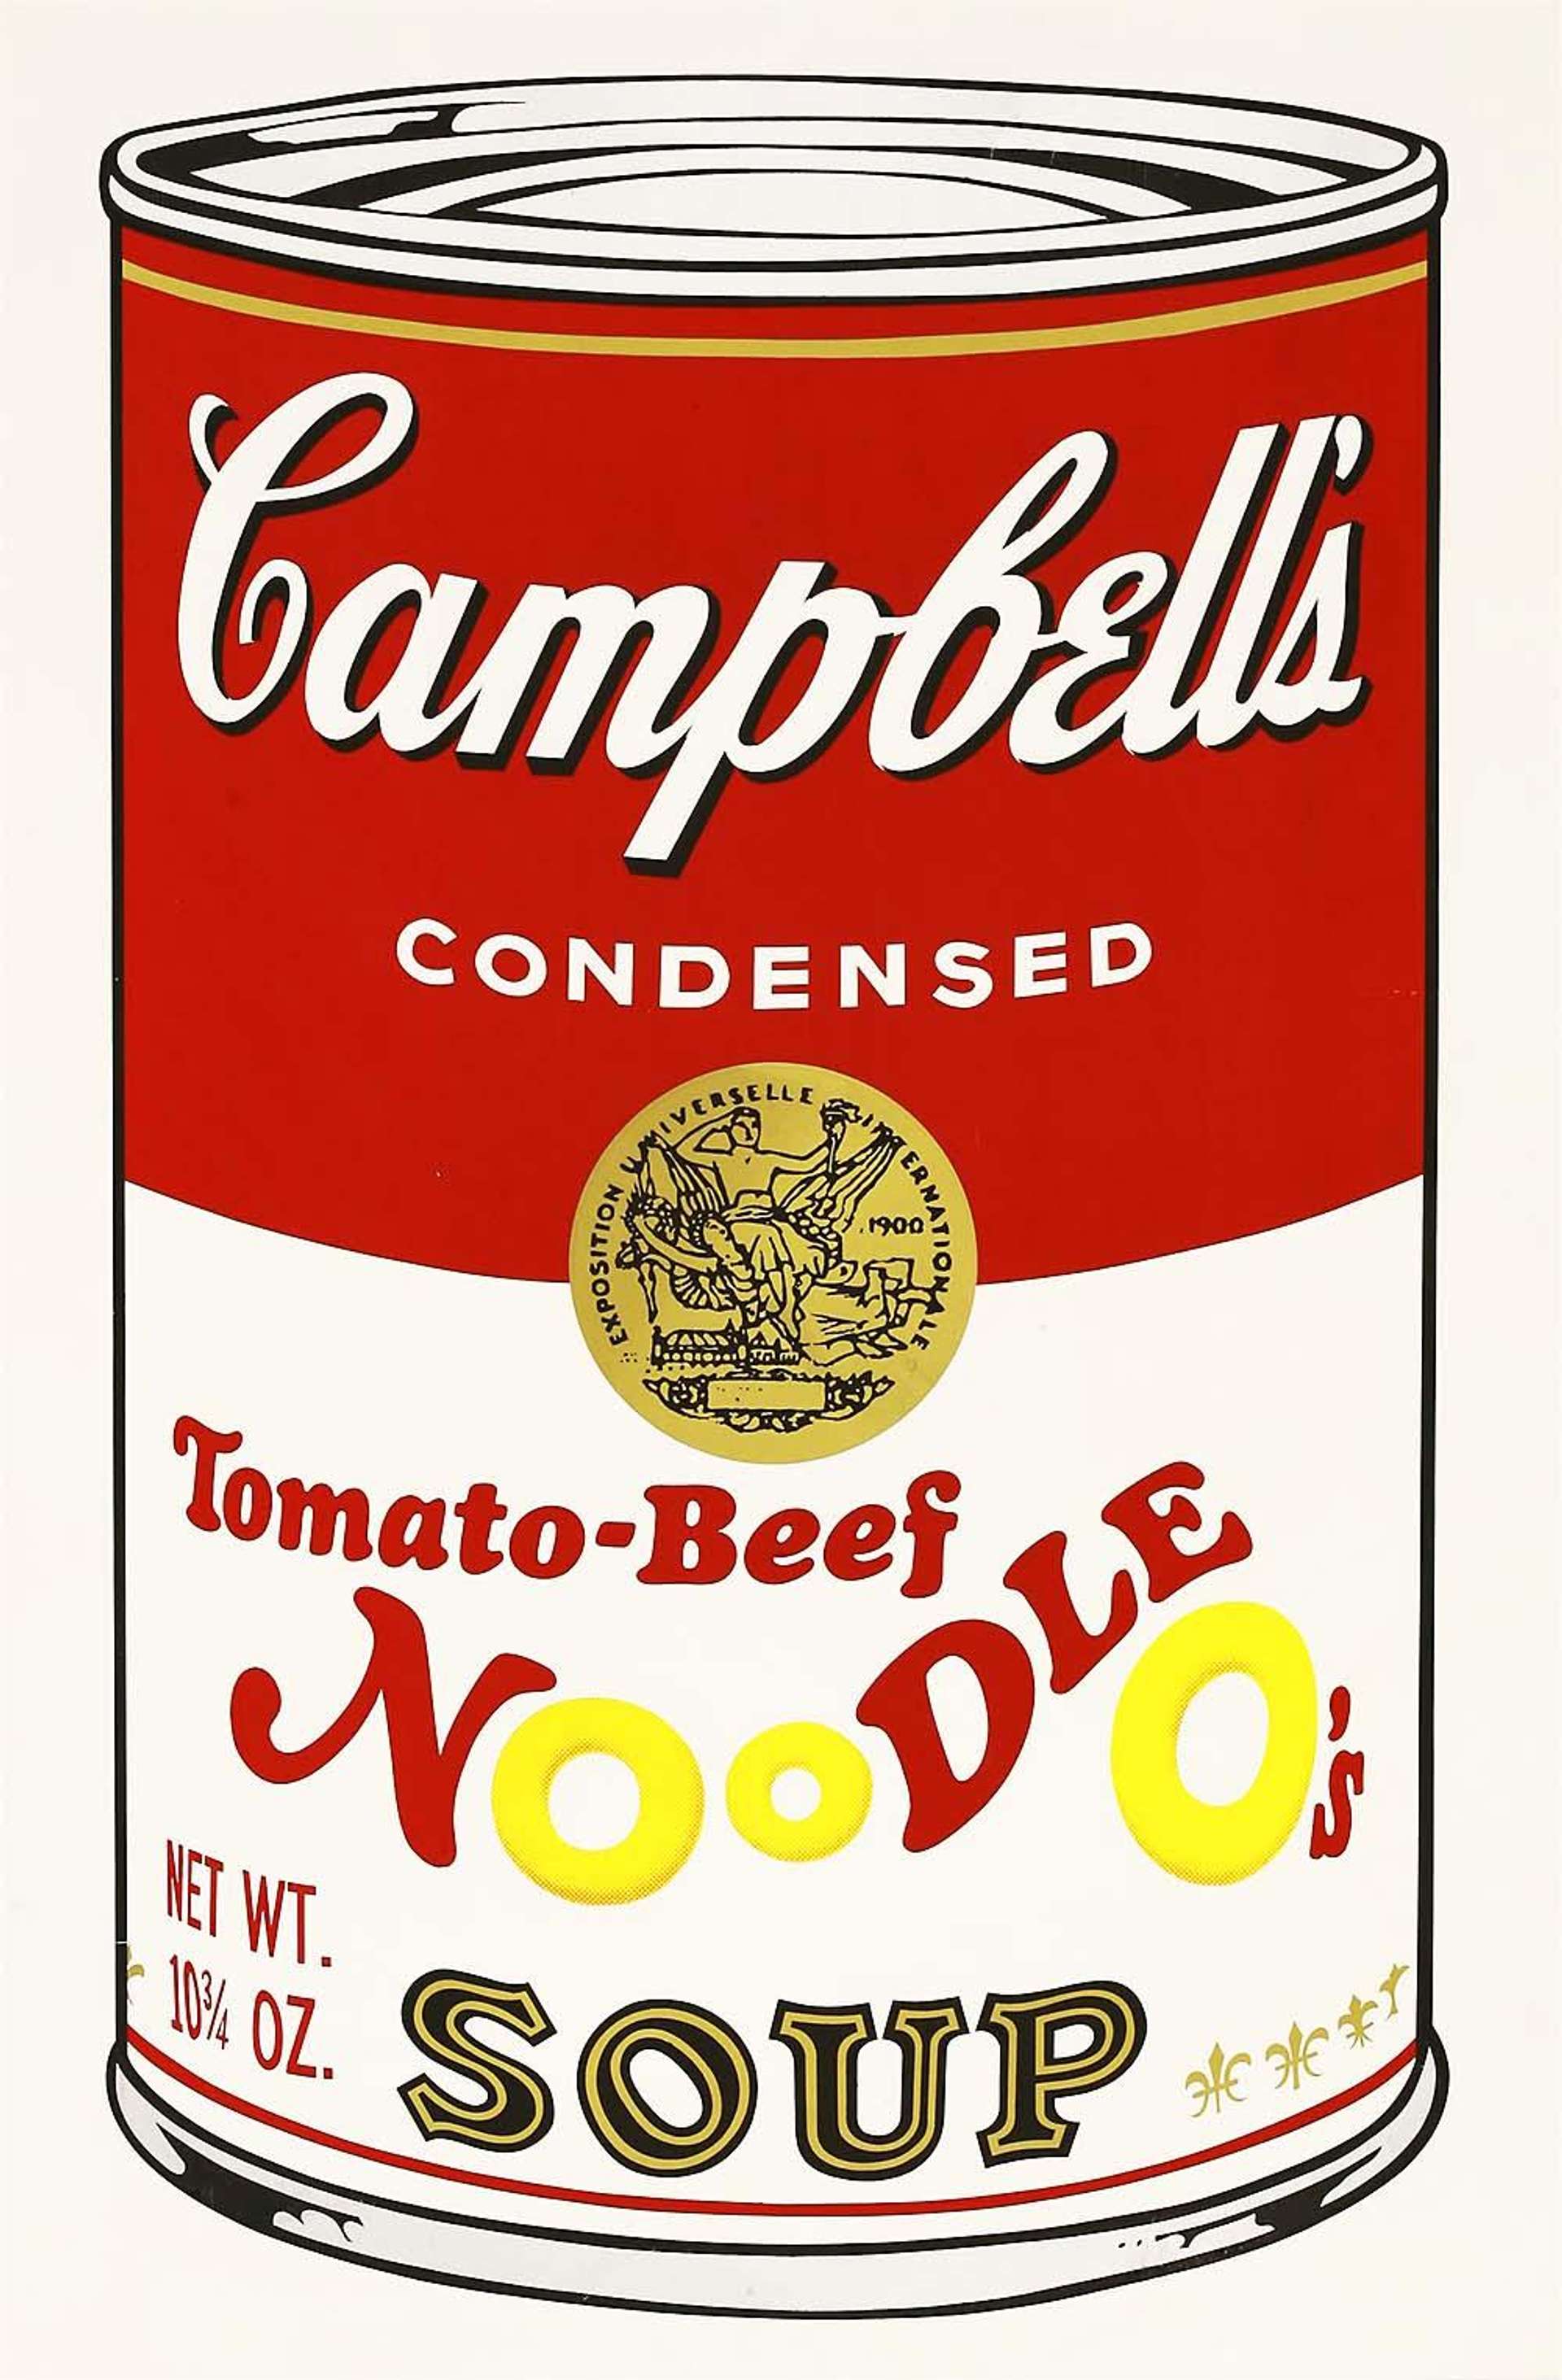 A screenprint by Andy Warhol depicting a Campbell's Tomato Beef Noodle O's soup can.